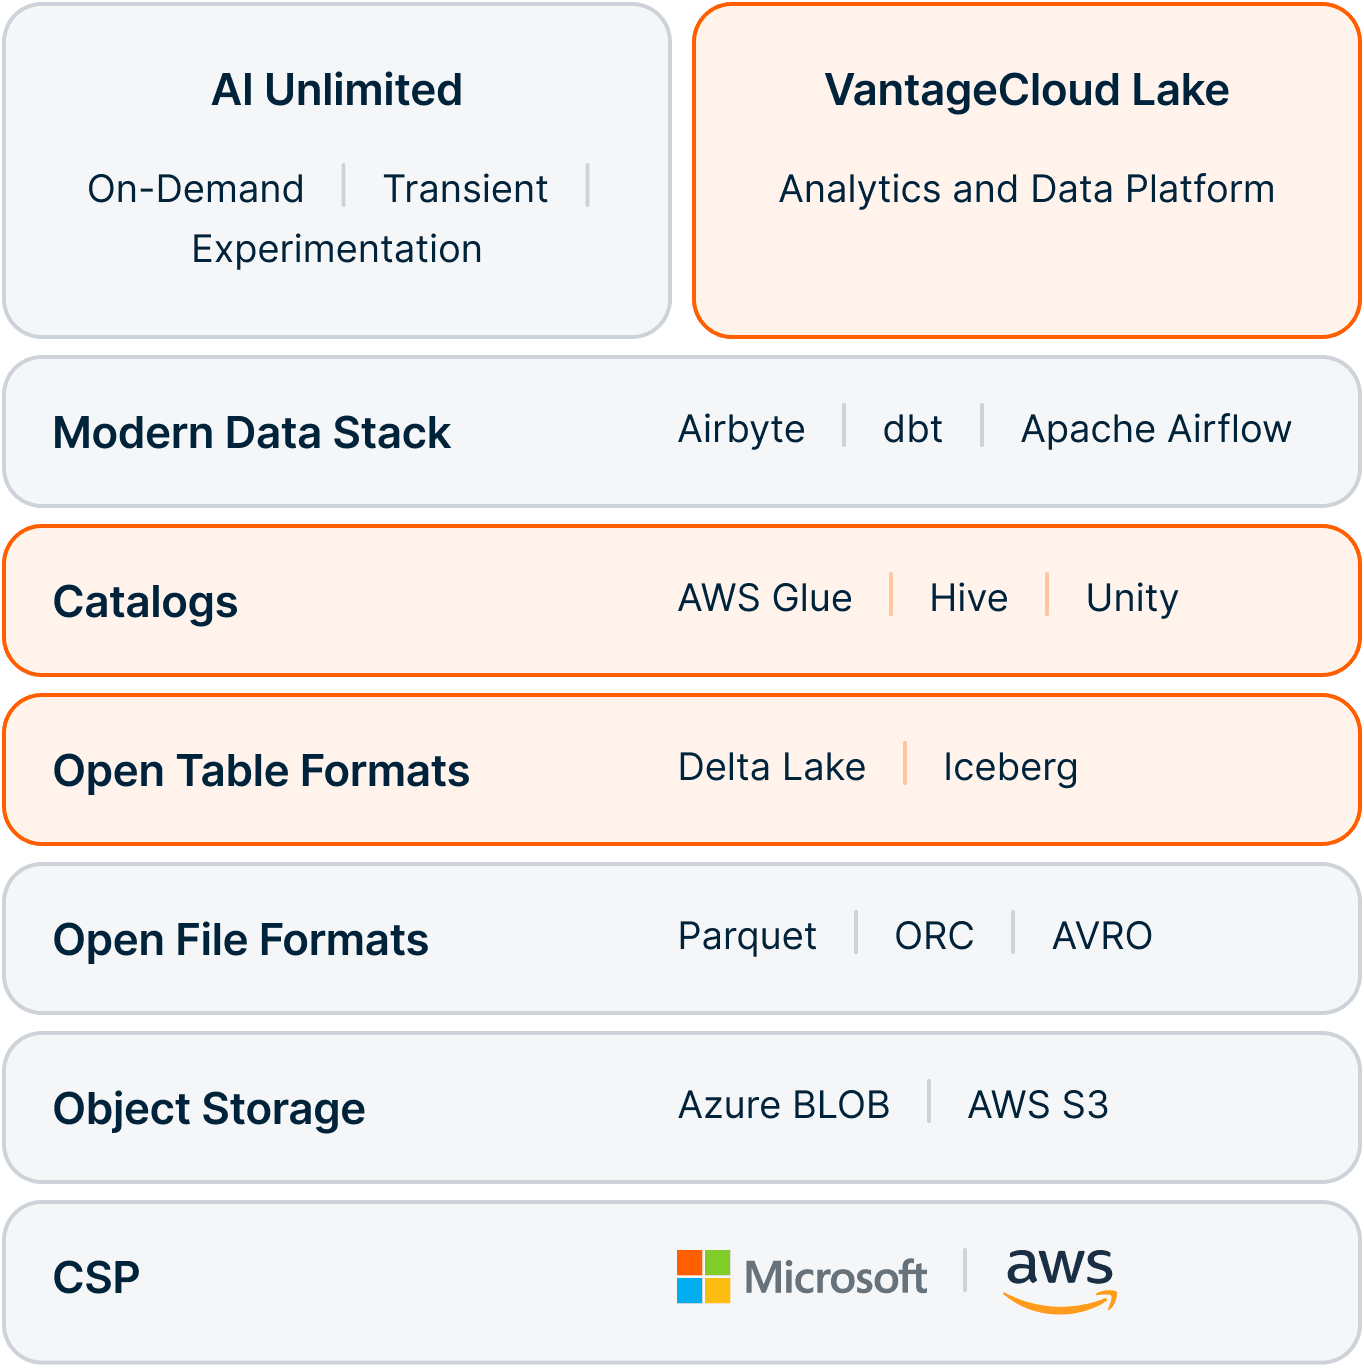 Teradata offers first-party services for Apache Iceberg and Linux Foundation Delta Lake with full support for cross-read, cross-write, and cross-query data stored in multiple OTFs.